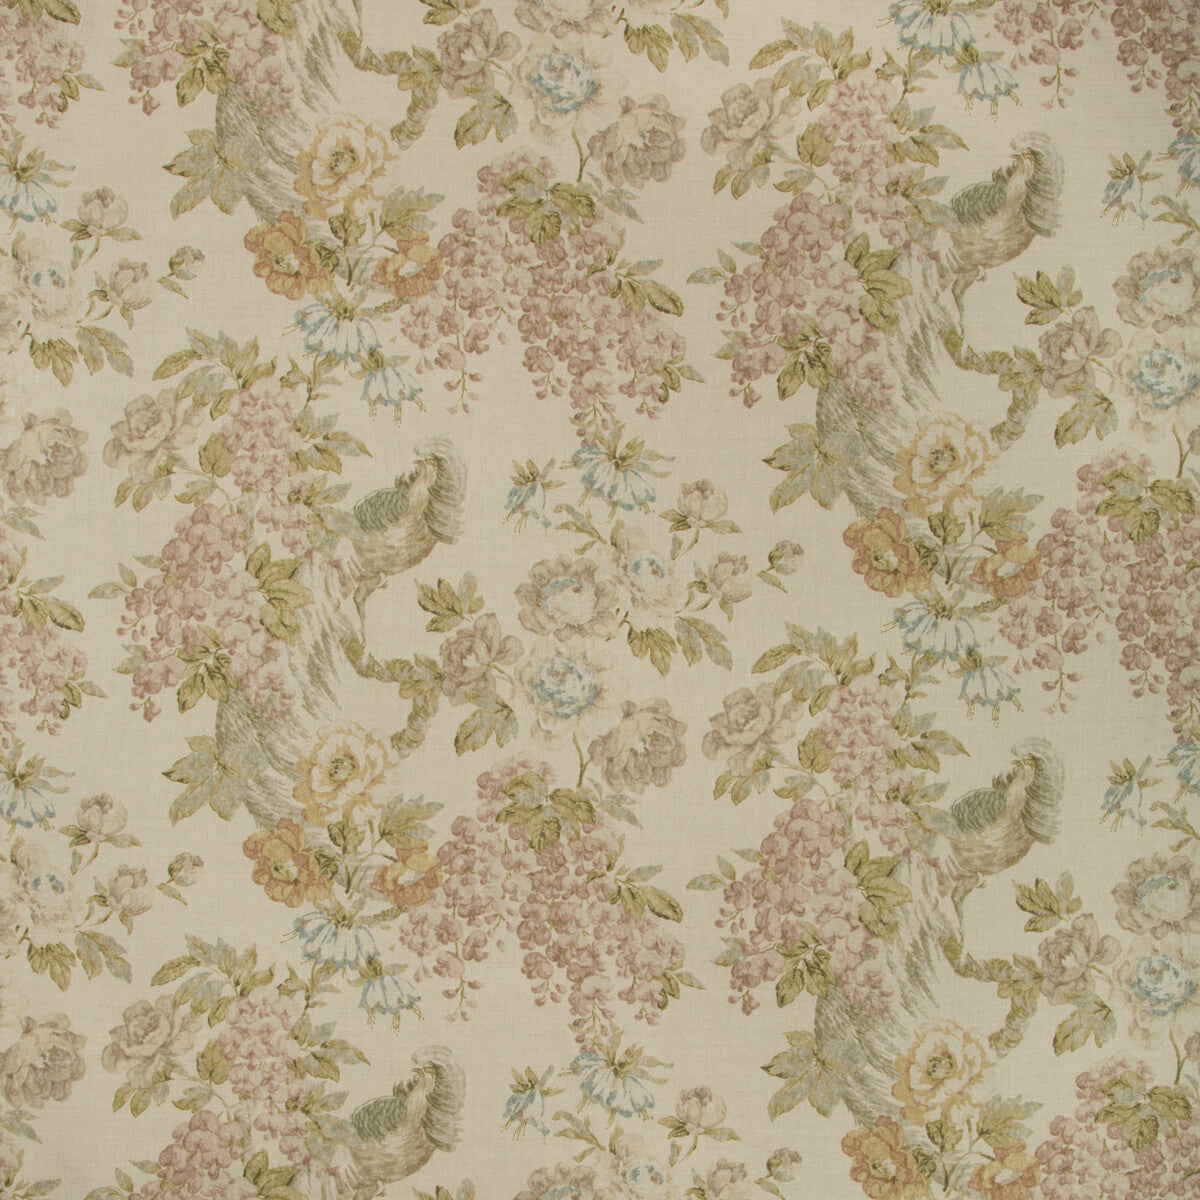 Montecito Floral fabric in olive/plum color - pattern 2018139.103.0 - by Lee Jofa in the Suzanne Rheinstein III collection